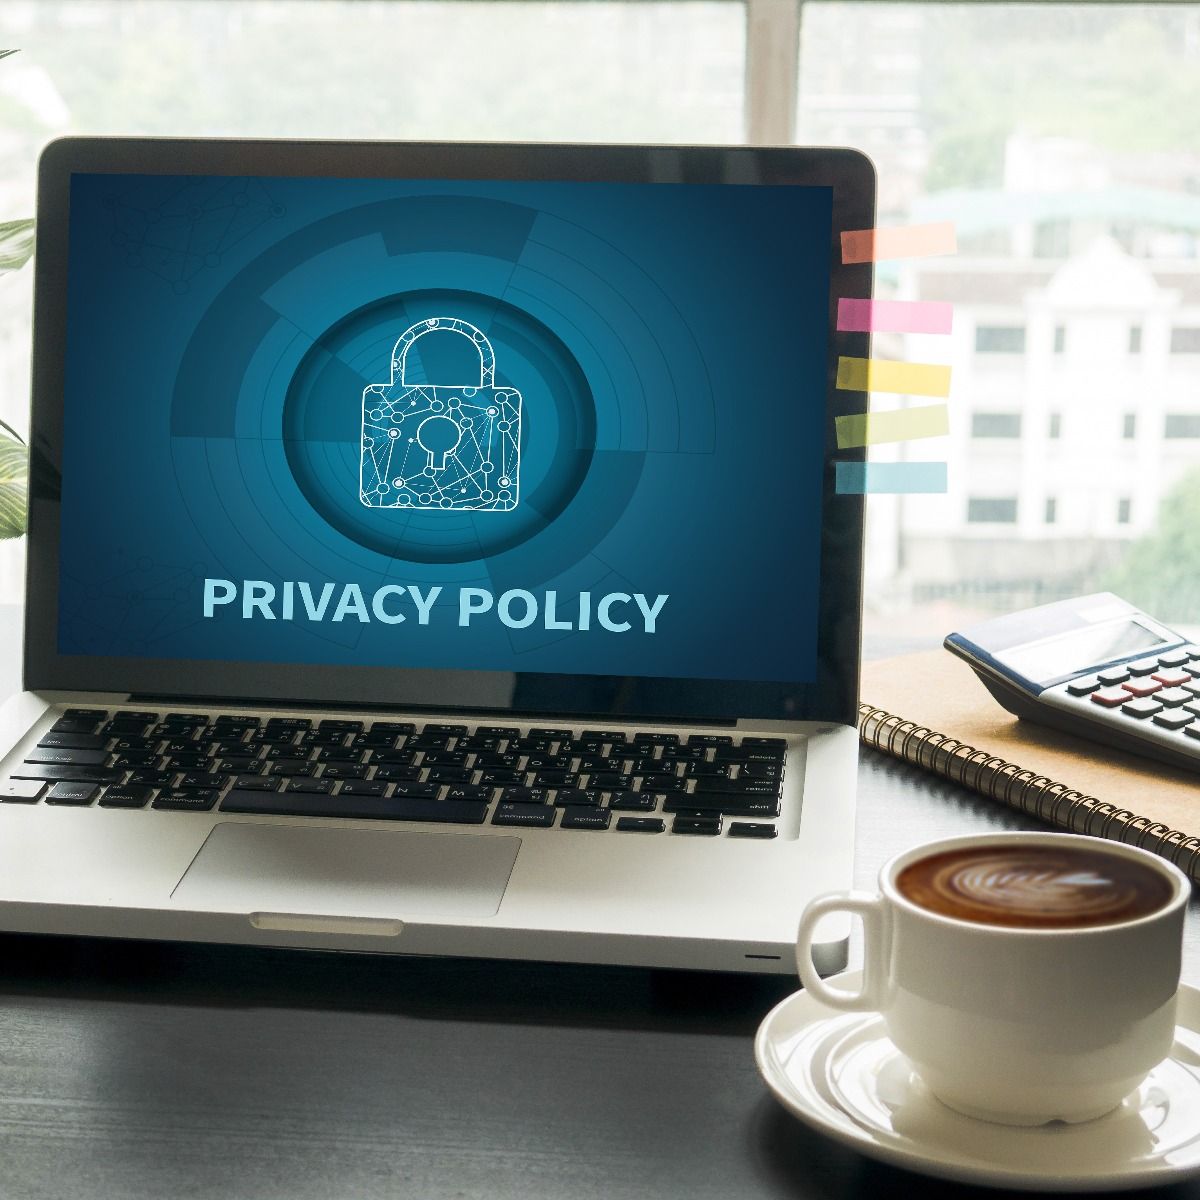 privacy policy on laptop screen